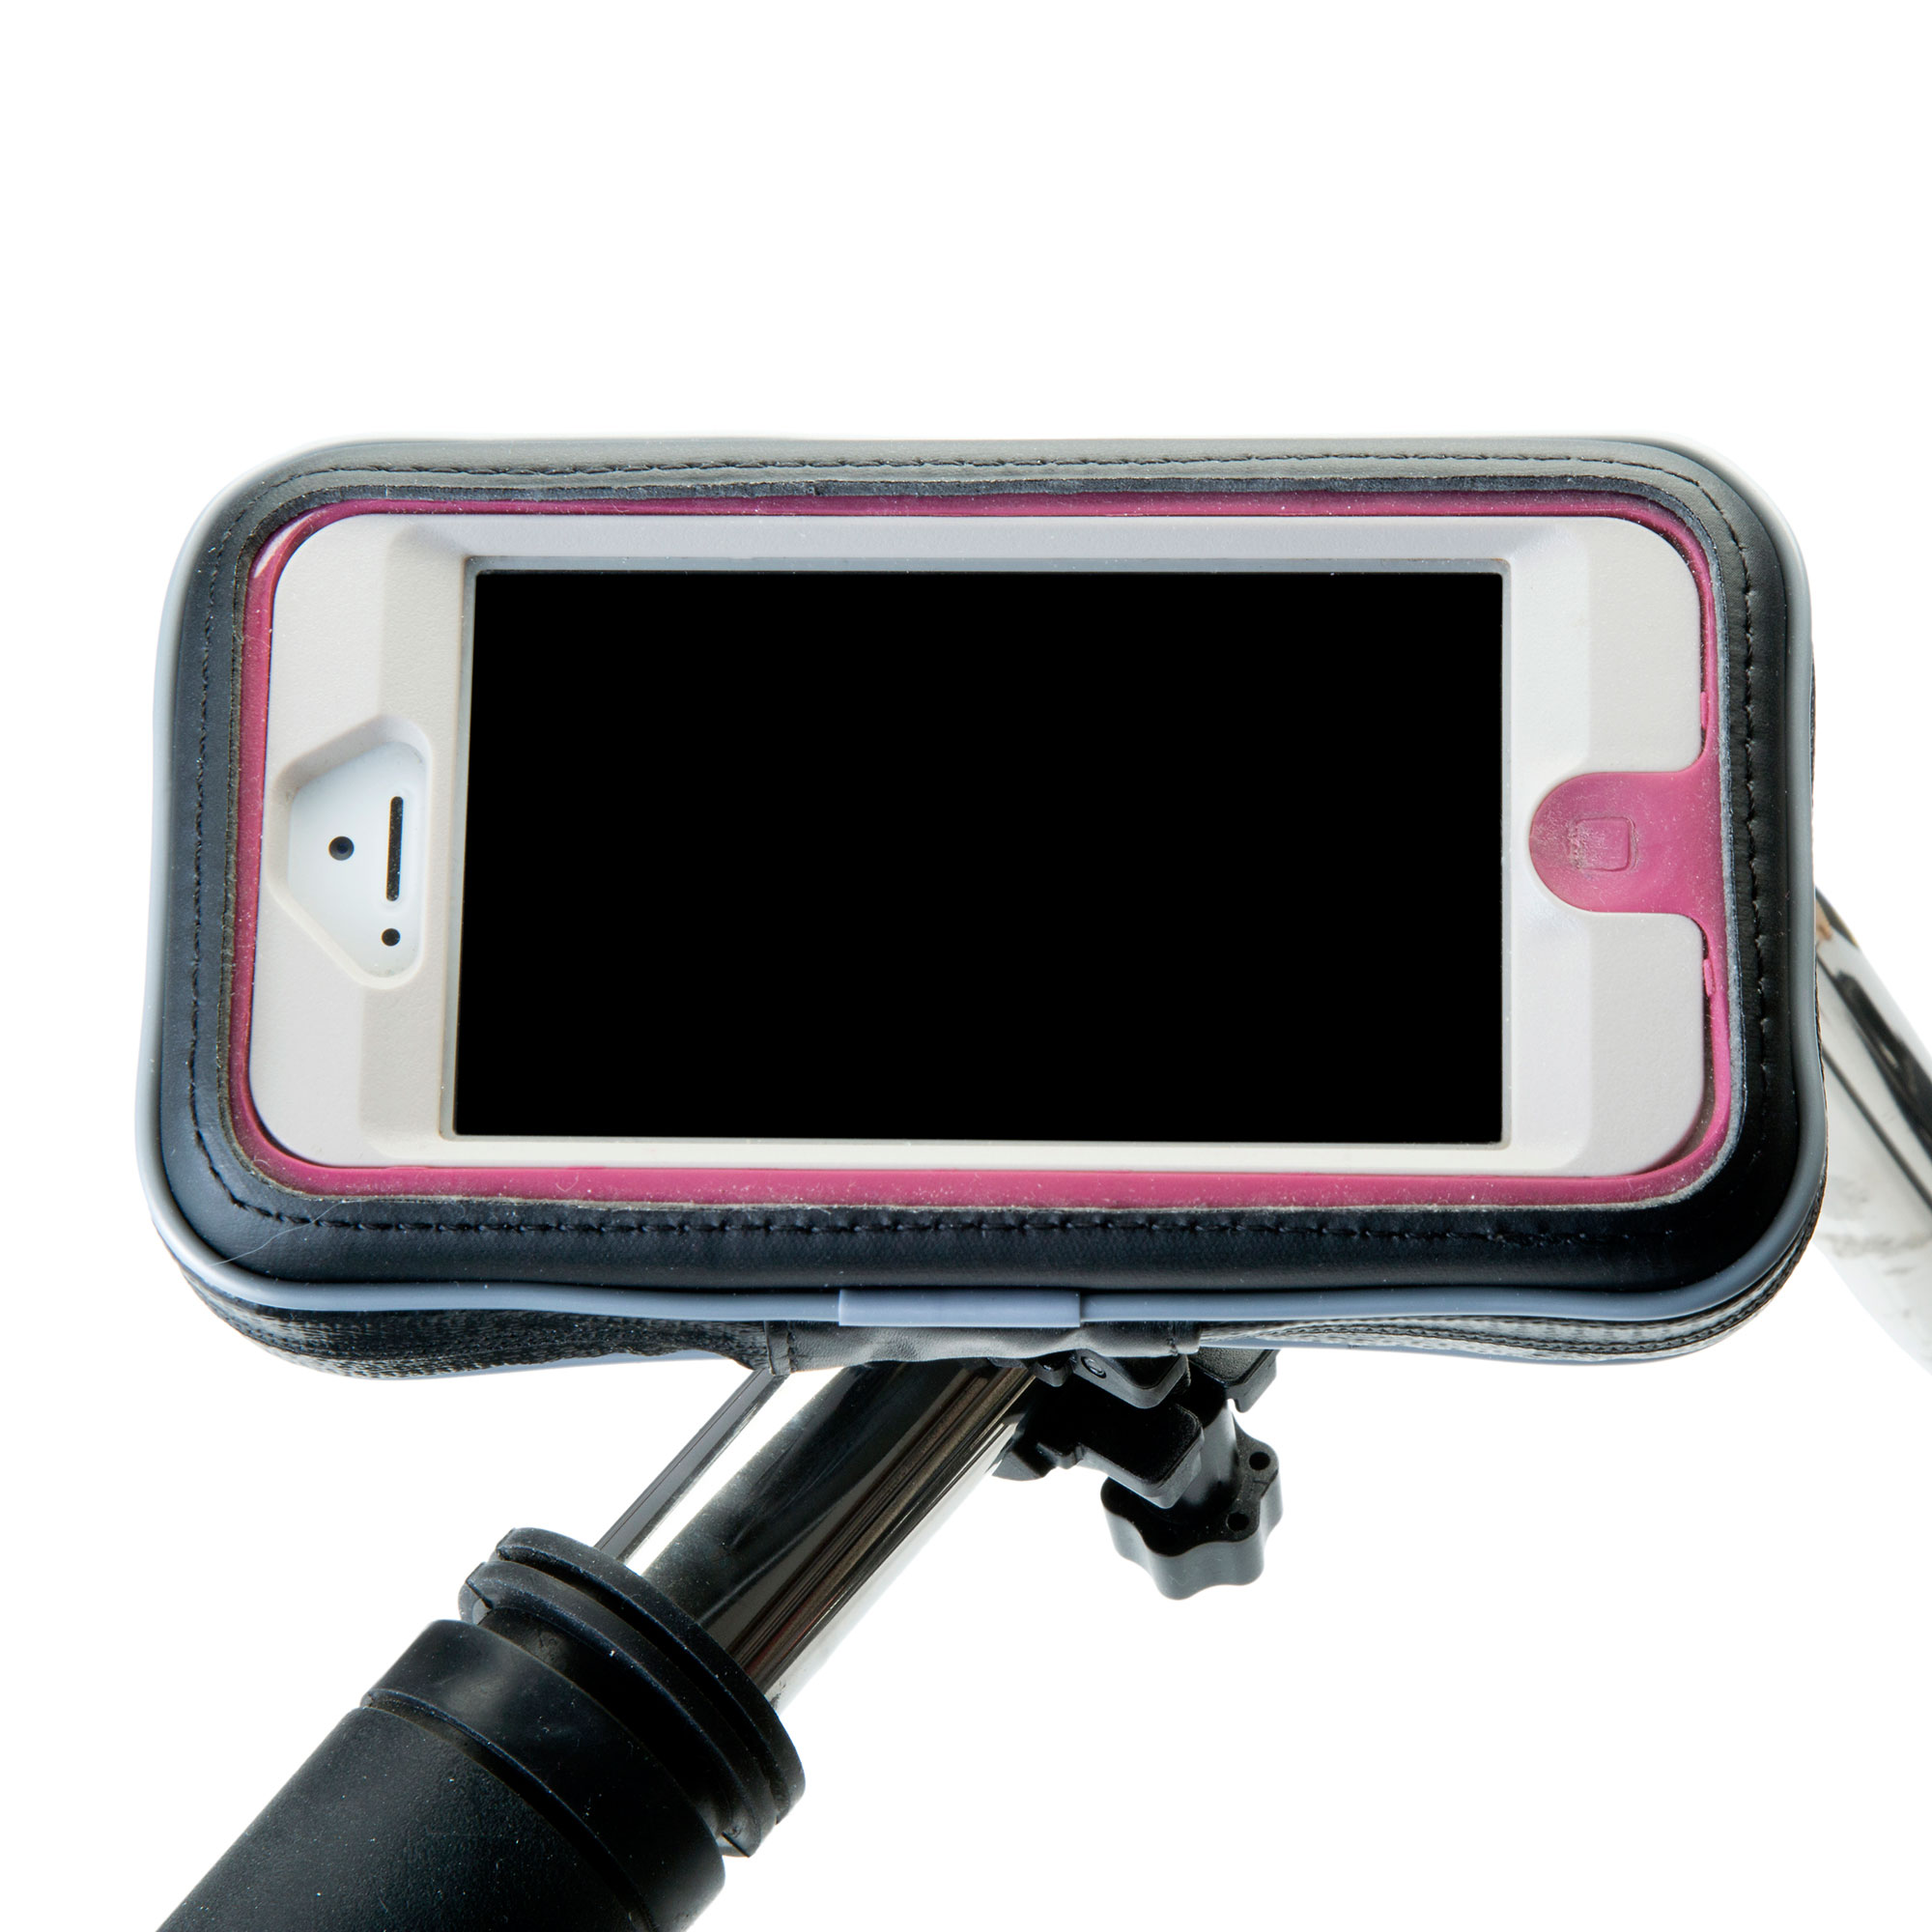 Heavy Duty Weather Resistant Bicycle / Motorcycle Handlebar Mount Holder Designed for the Samsung Vibrant Plus